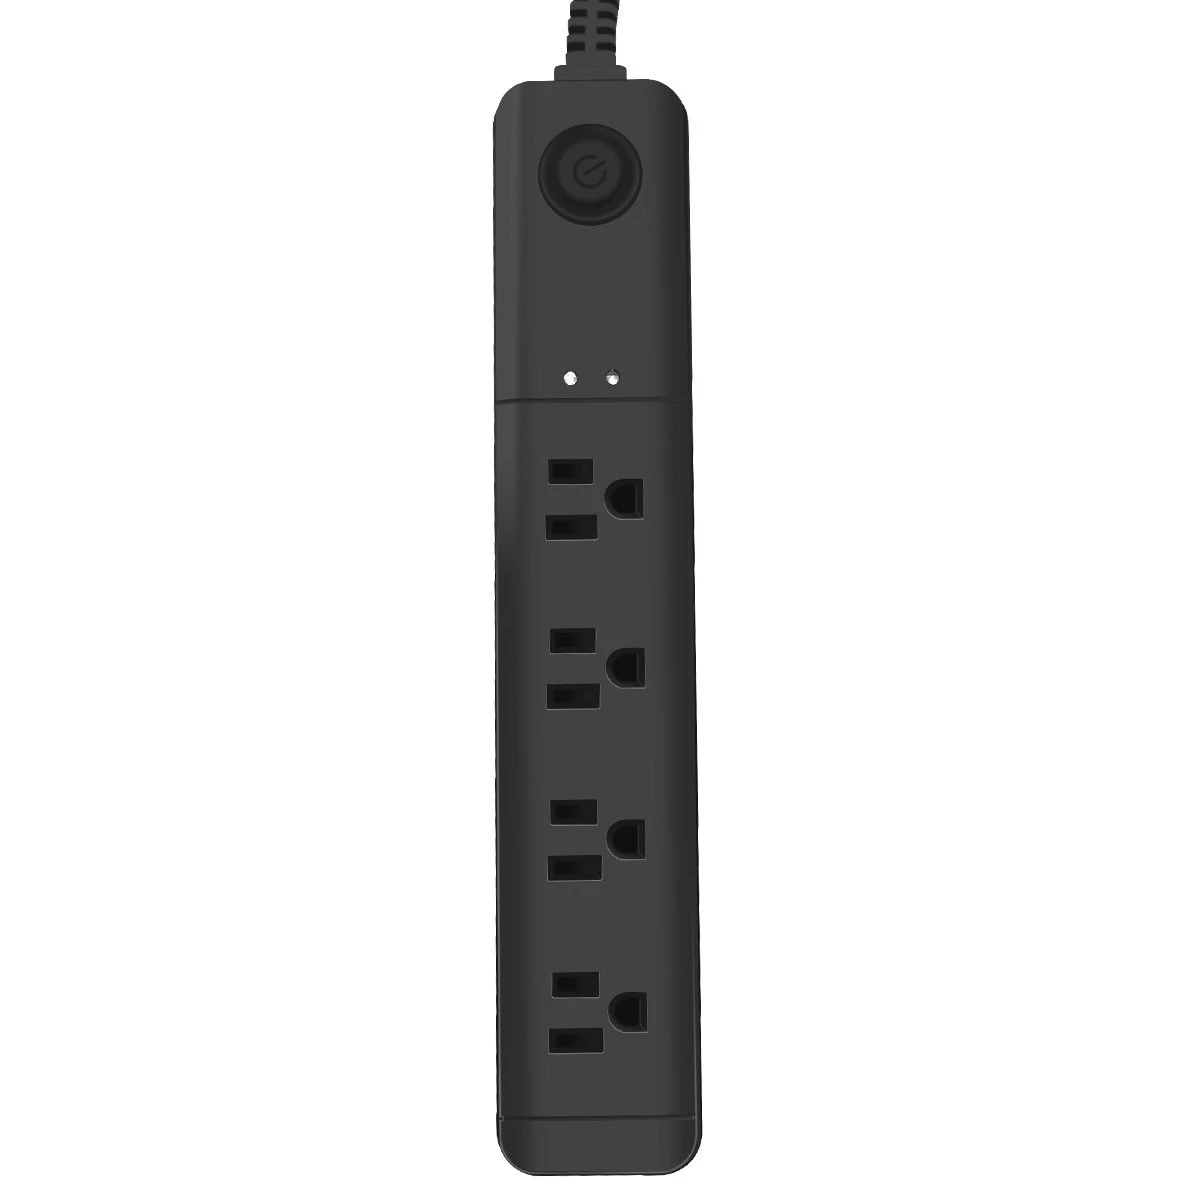 C168 Black extension electric socket with 4 ports and WiFi extension customized pop socket electrical switch sockets CE